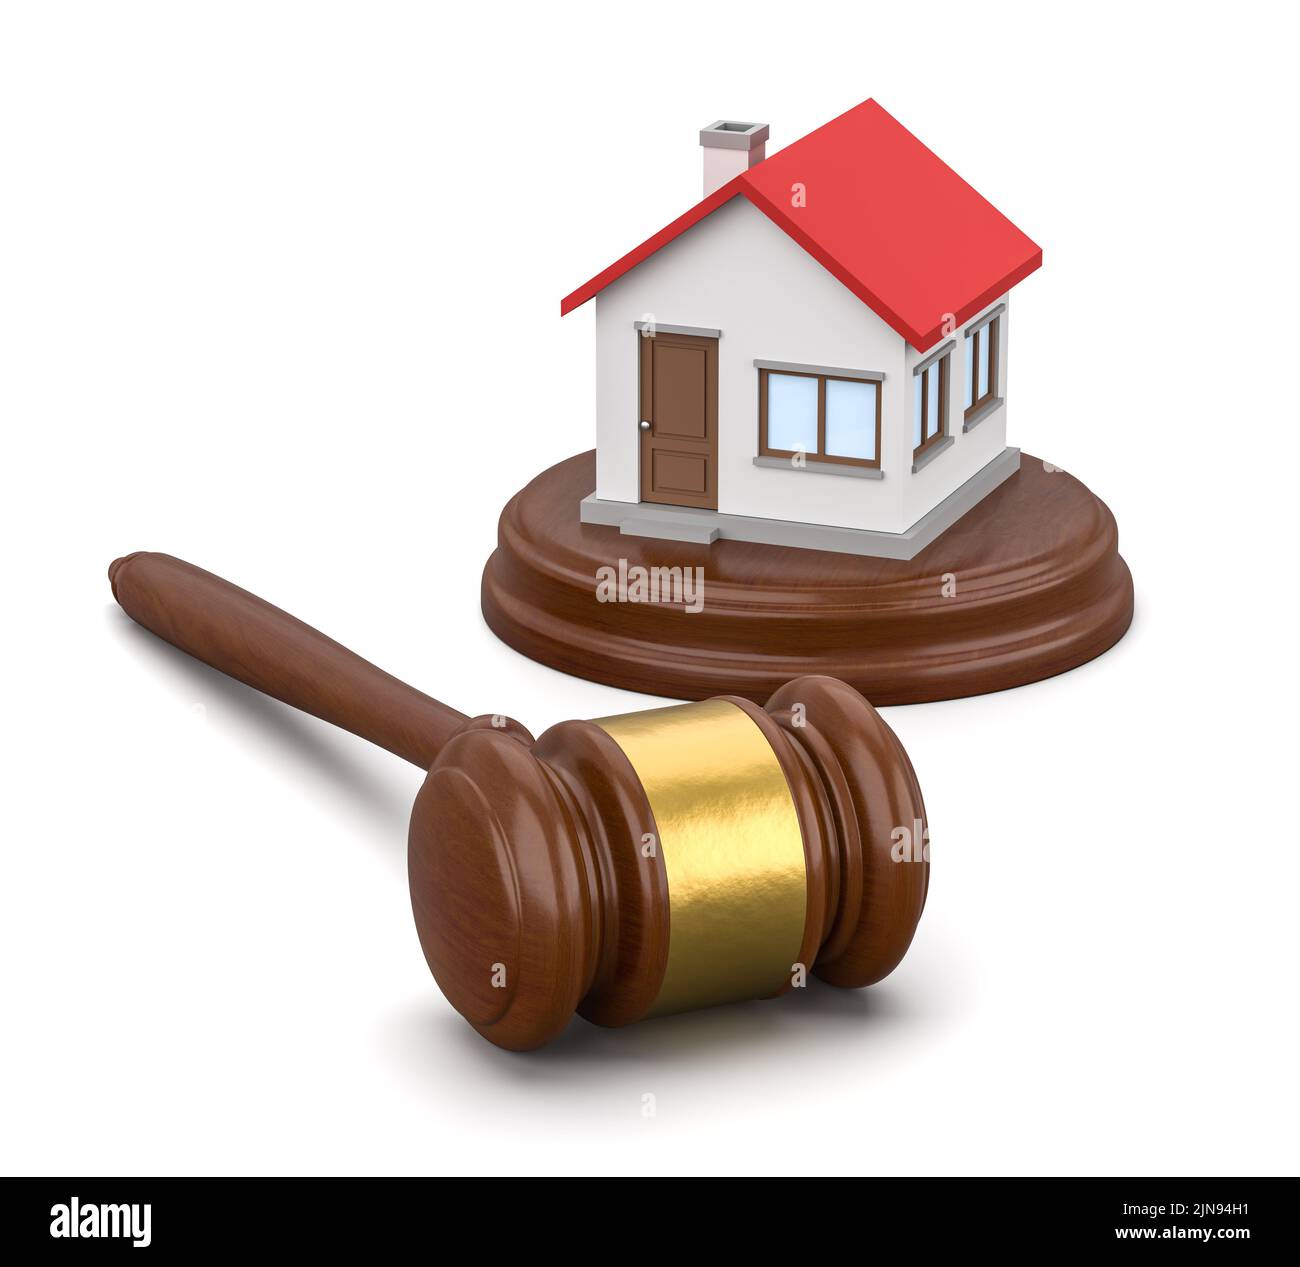 Judge's Gavel and House on White Background Stock Photo